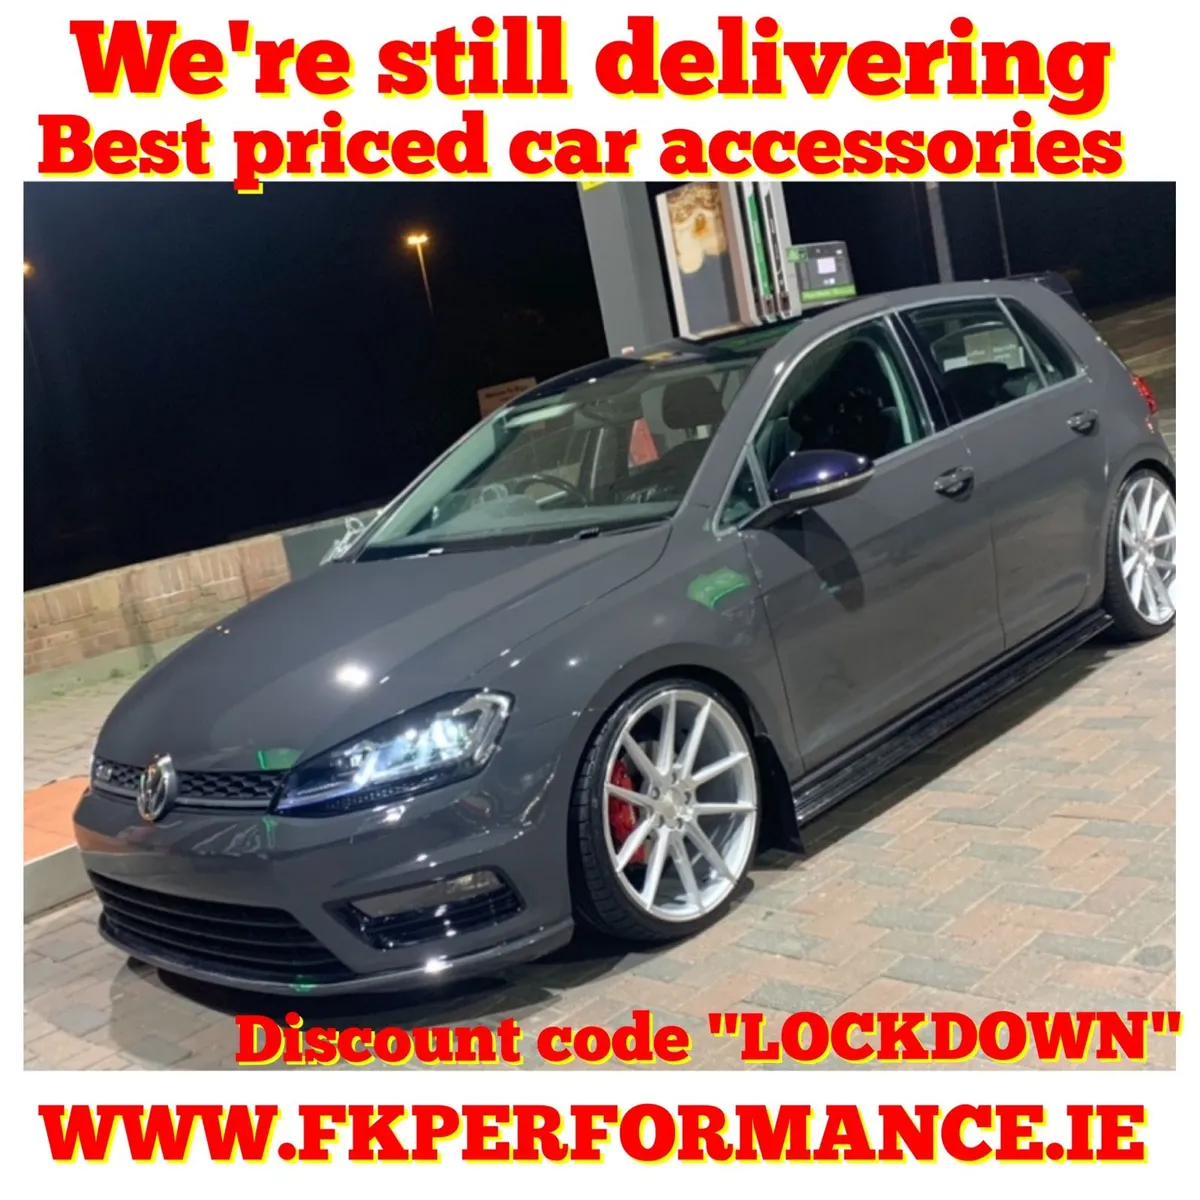 Upgrade to Coilover suspension at FK performance - Image 1